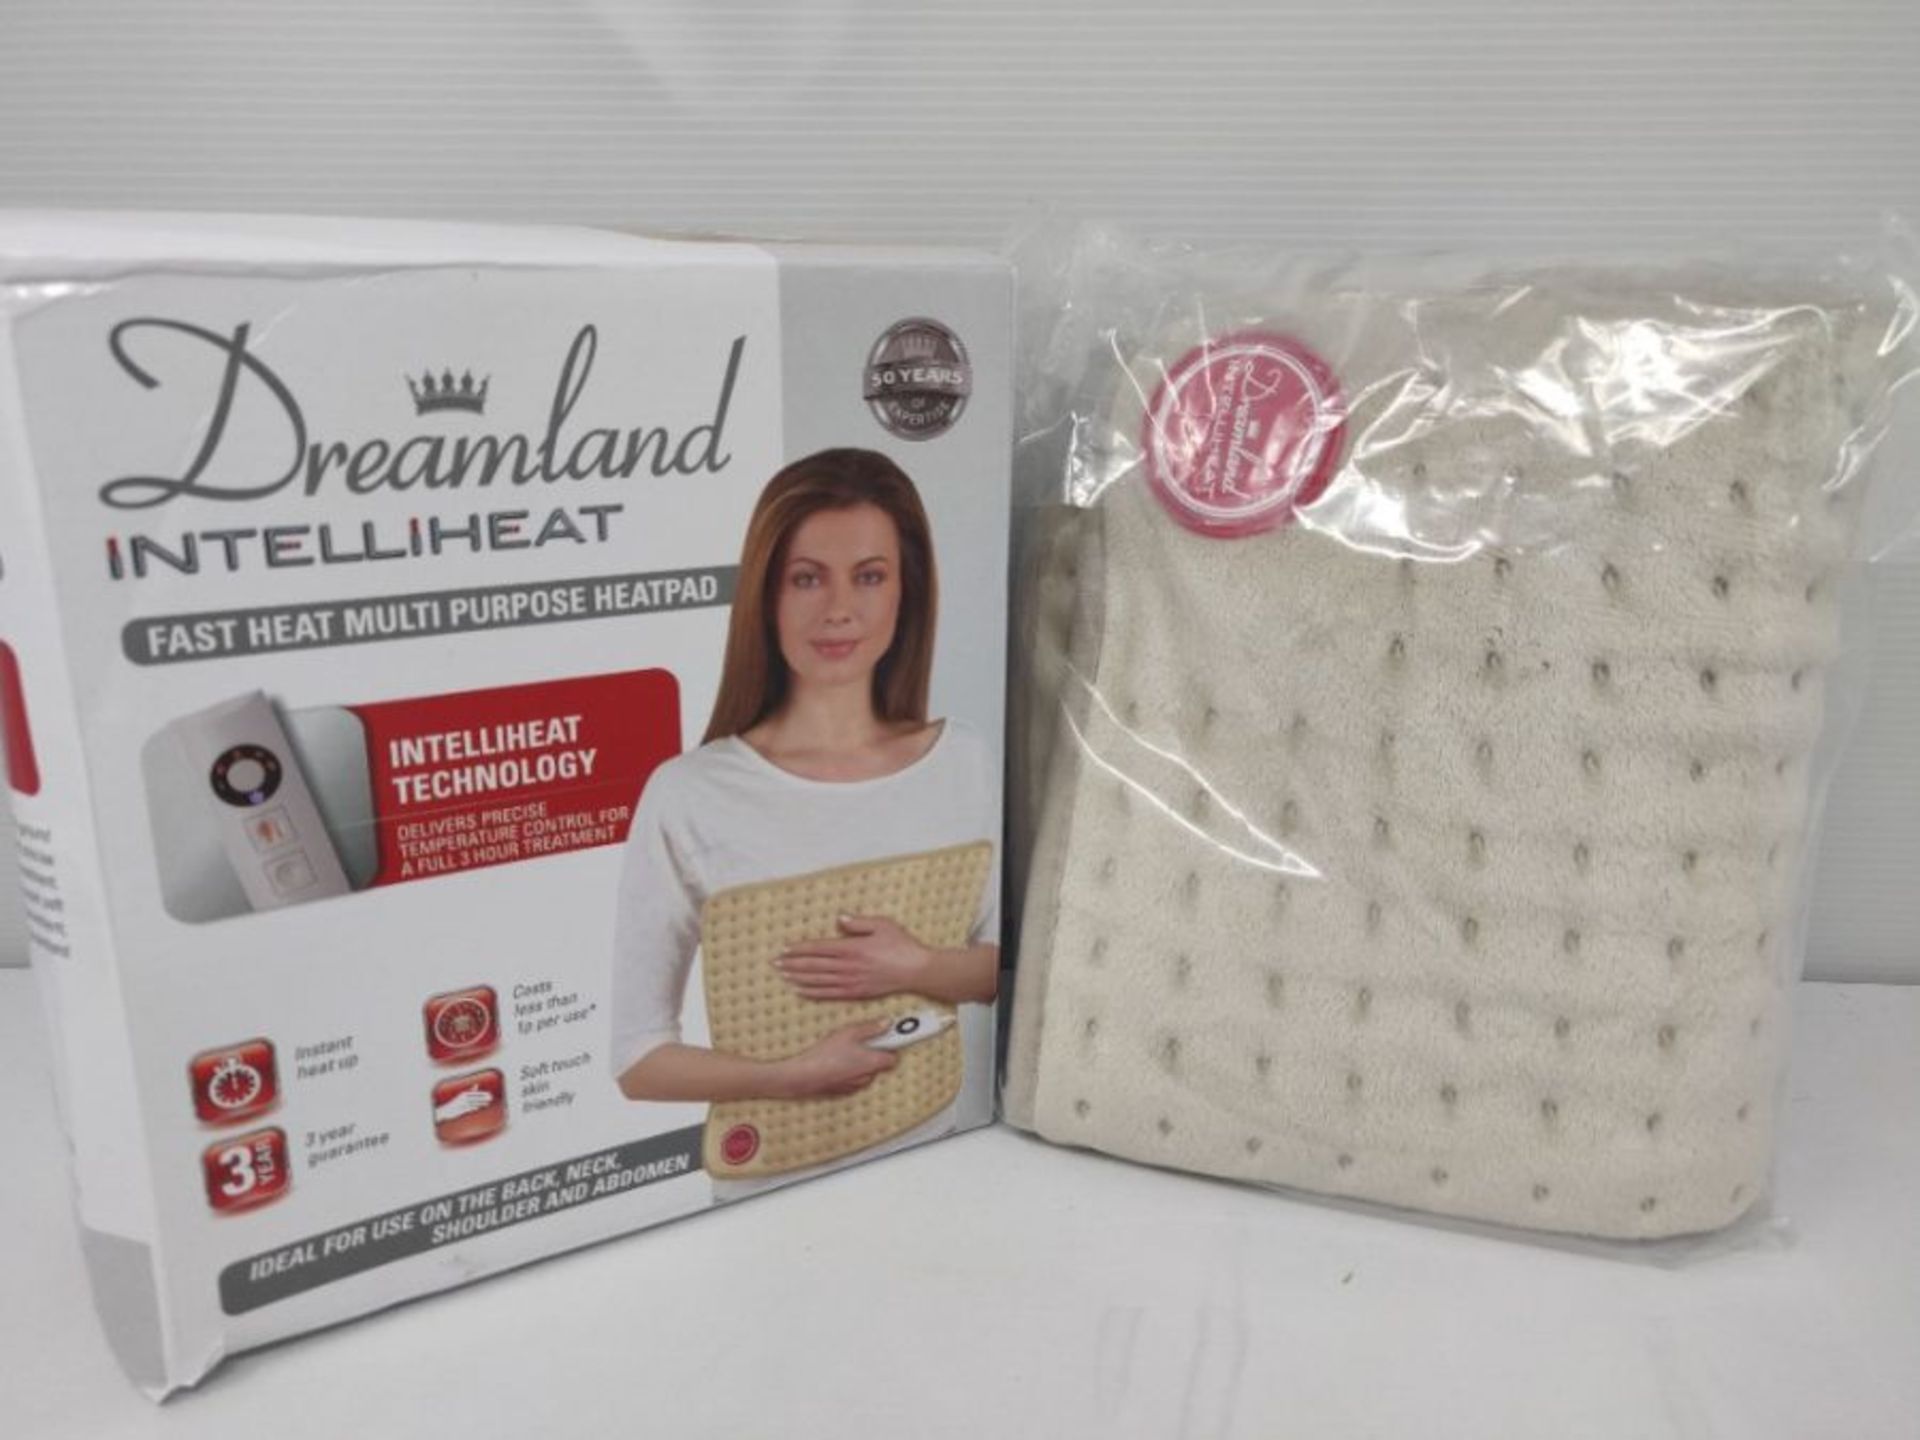 Dreamland Intelliheat Multi Purpose Heat Pad, Instant Heat up, Soft to Touch, Size 40x - Image 2 of 2